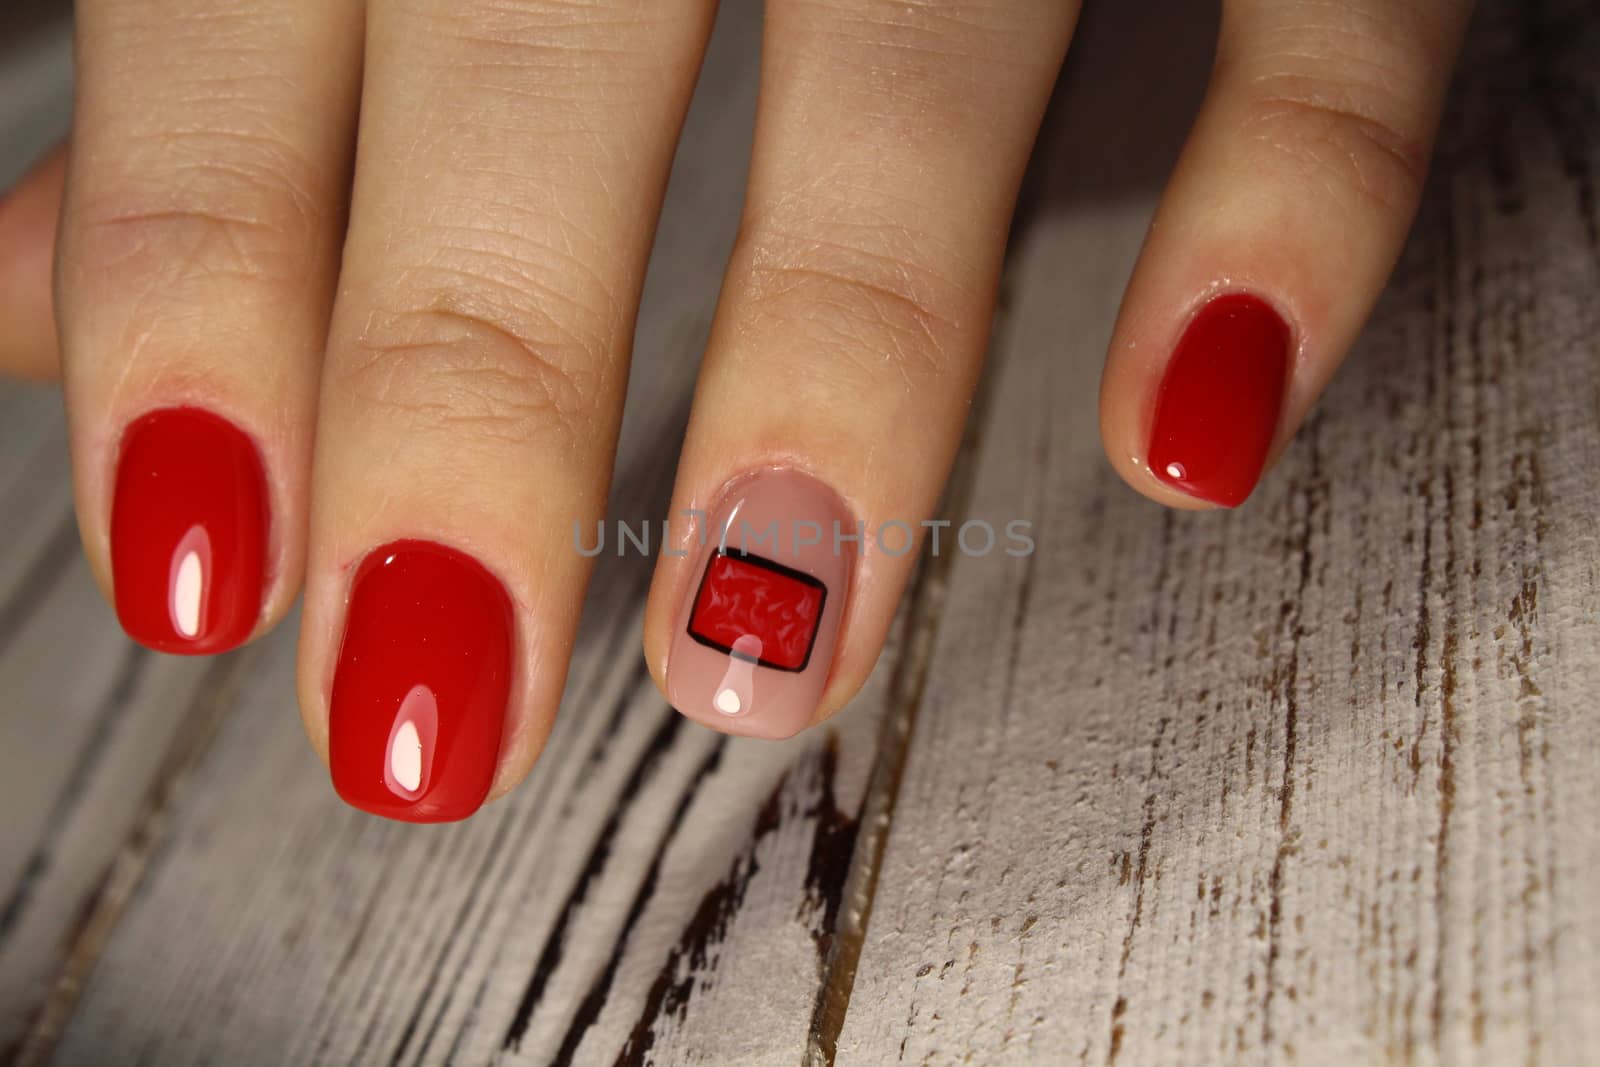 Manicure design nails varnish changes color. Thermo